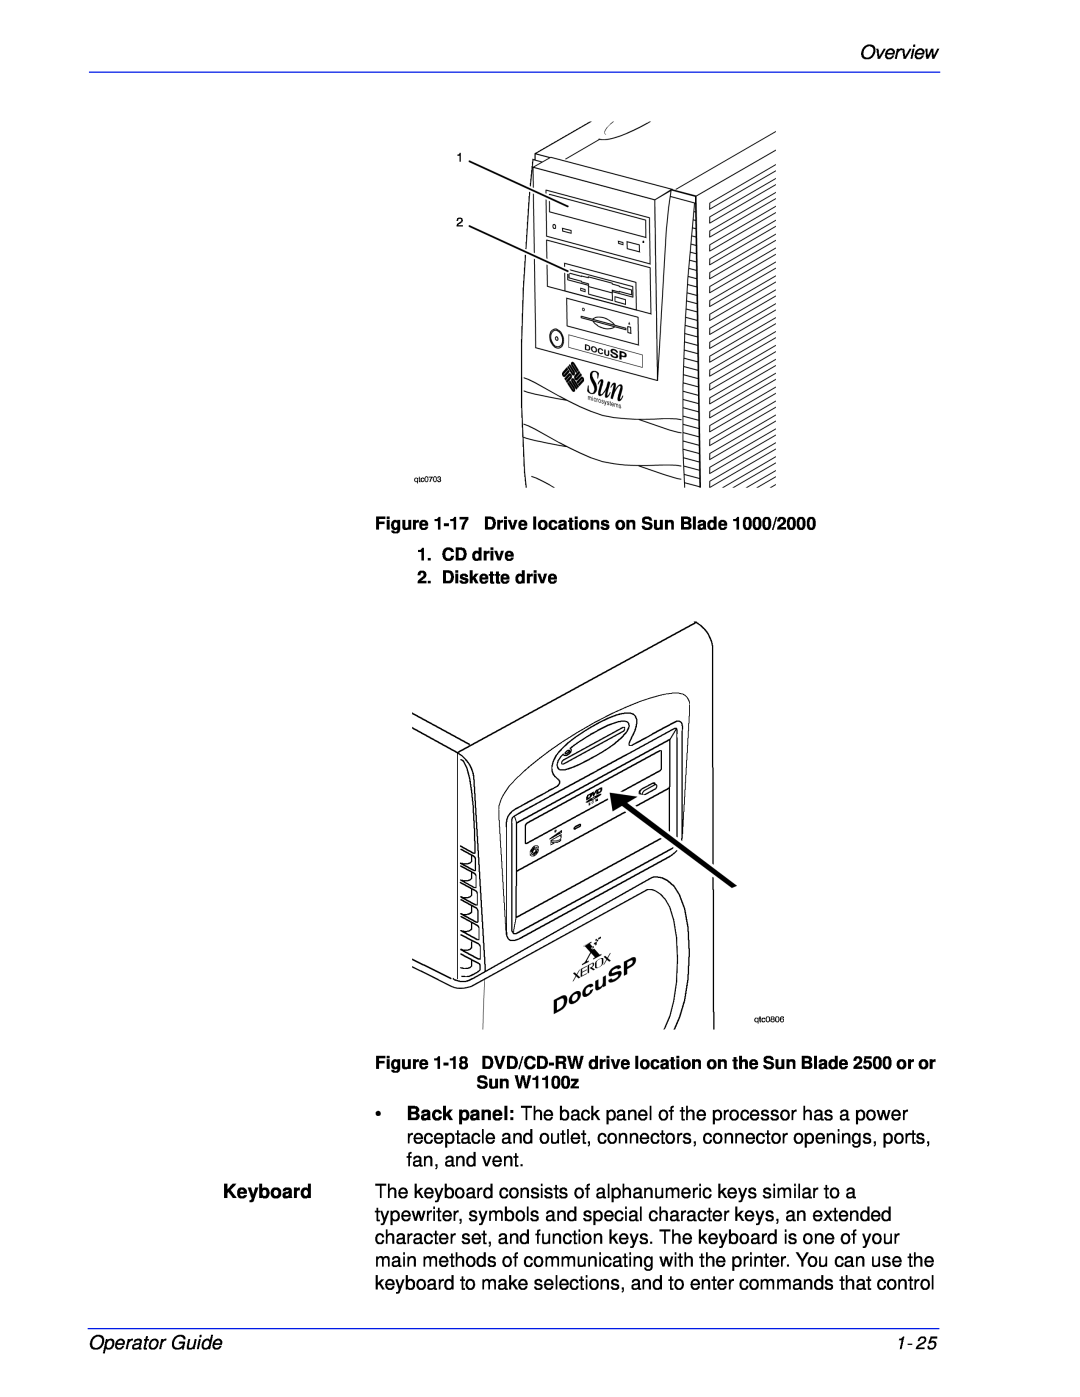 Xerox 180 EPS manual Overview, Operator Guide, 17Drive locations on Sun Blade 1000/2000, CD drive 2.Diskette drive 